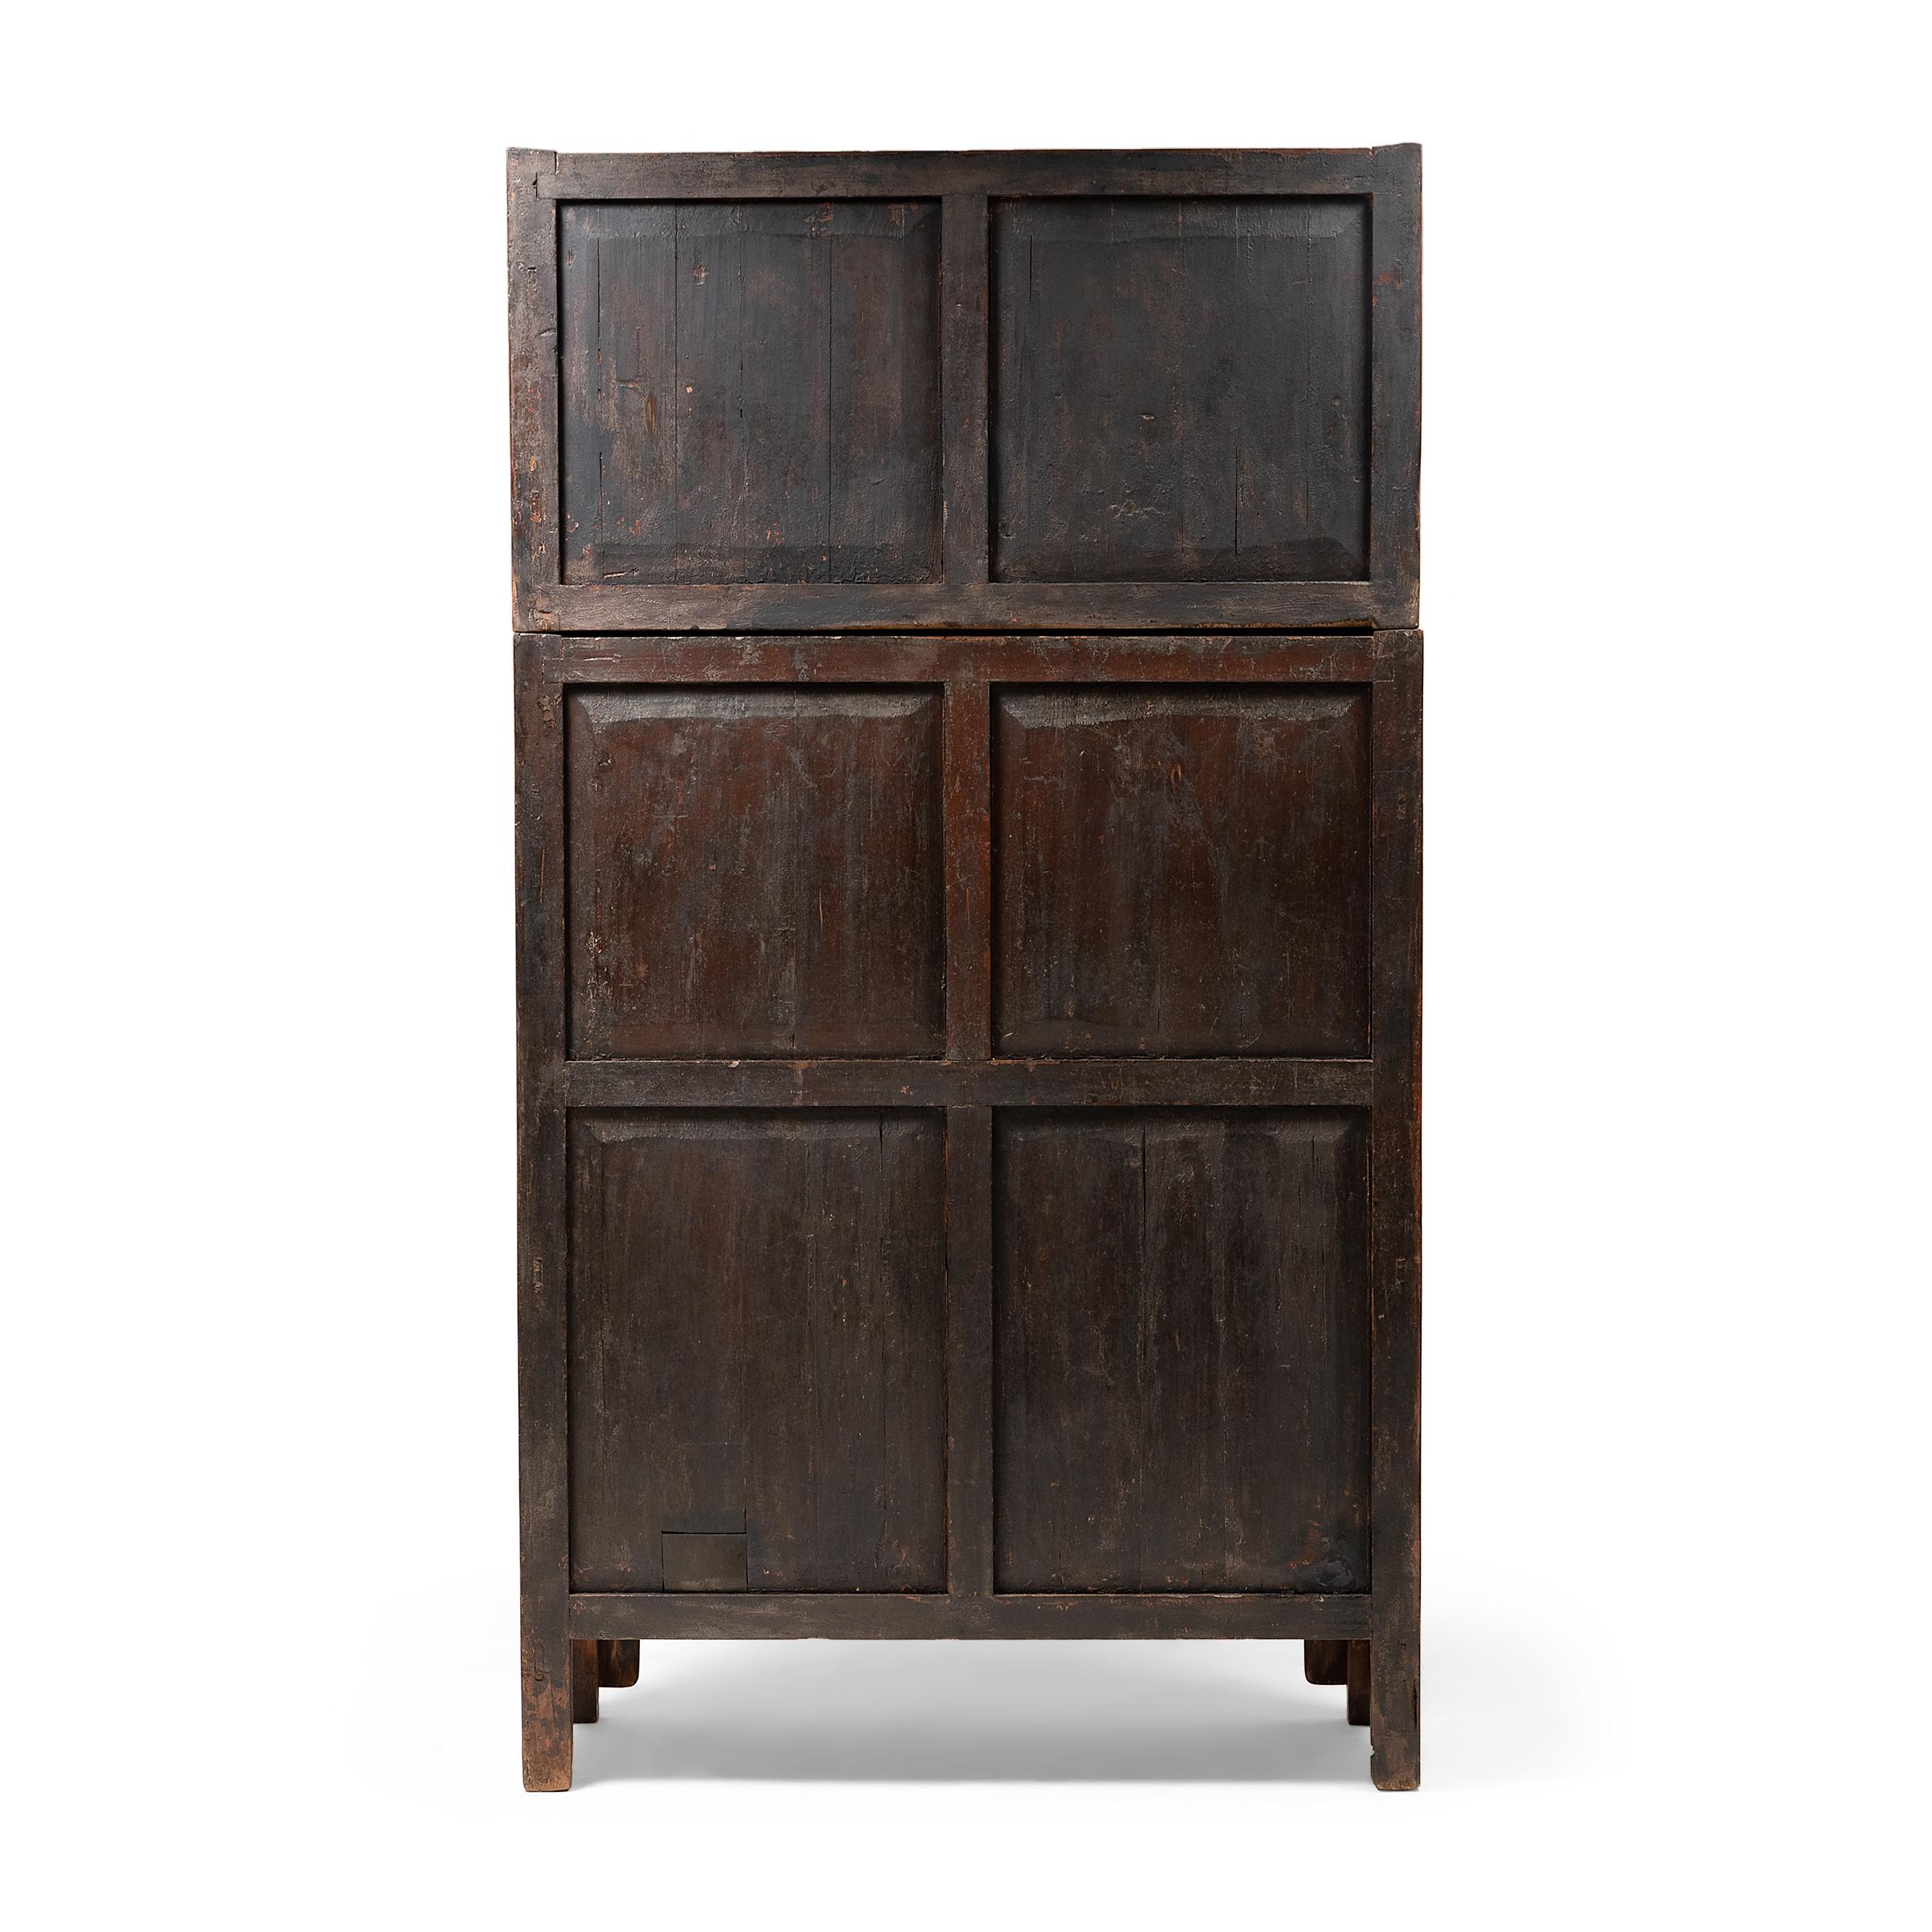 Pair of Chinese Camphor Burl Compound Cabinets, c. 1850 For Sale 2